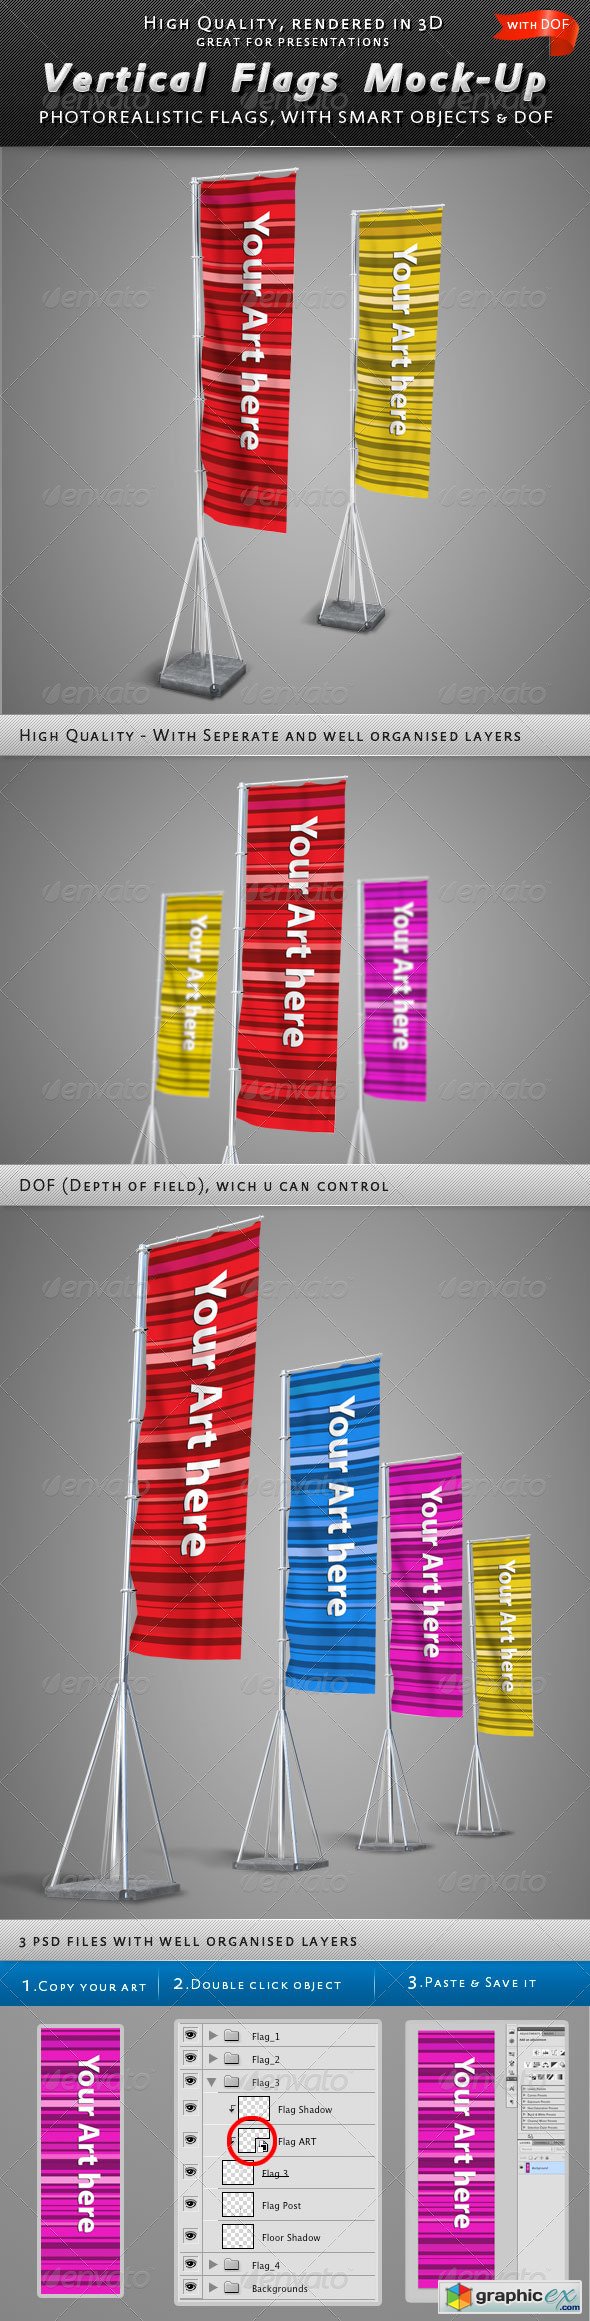 Vertical Flags Mock-Up